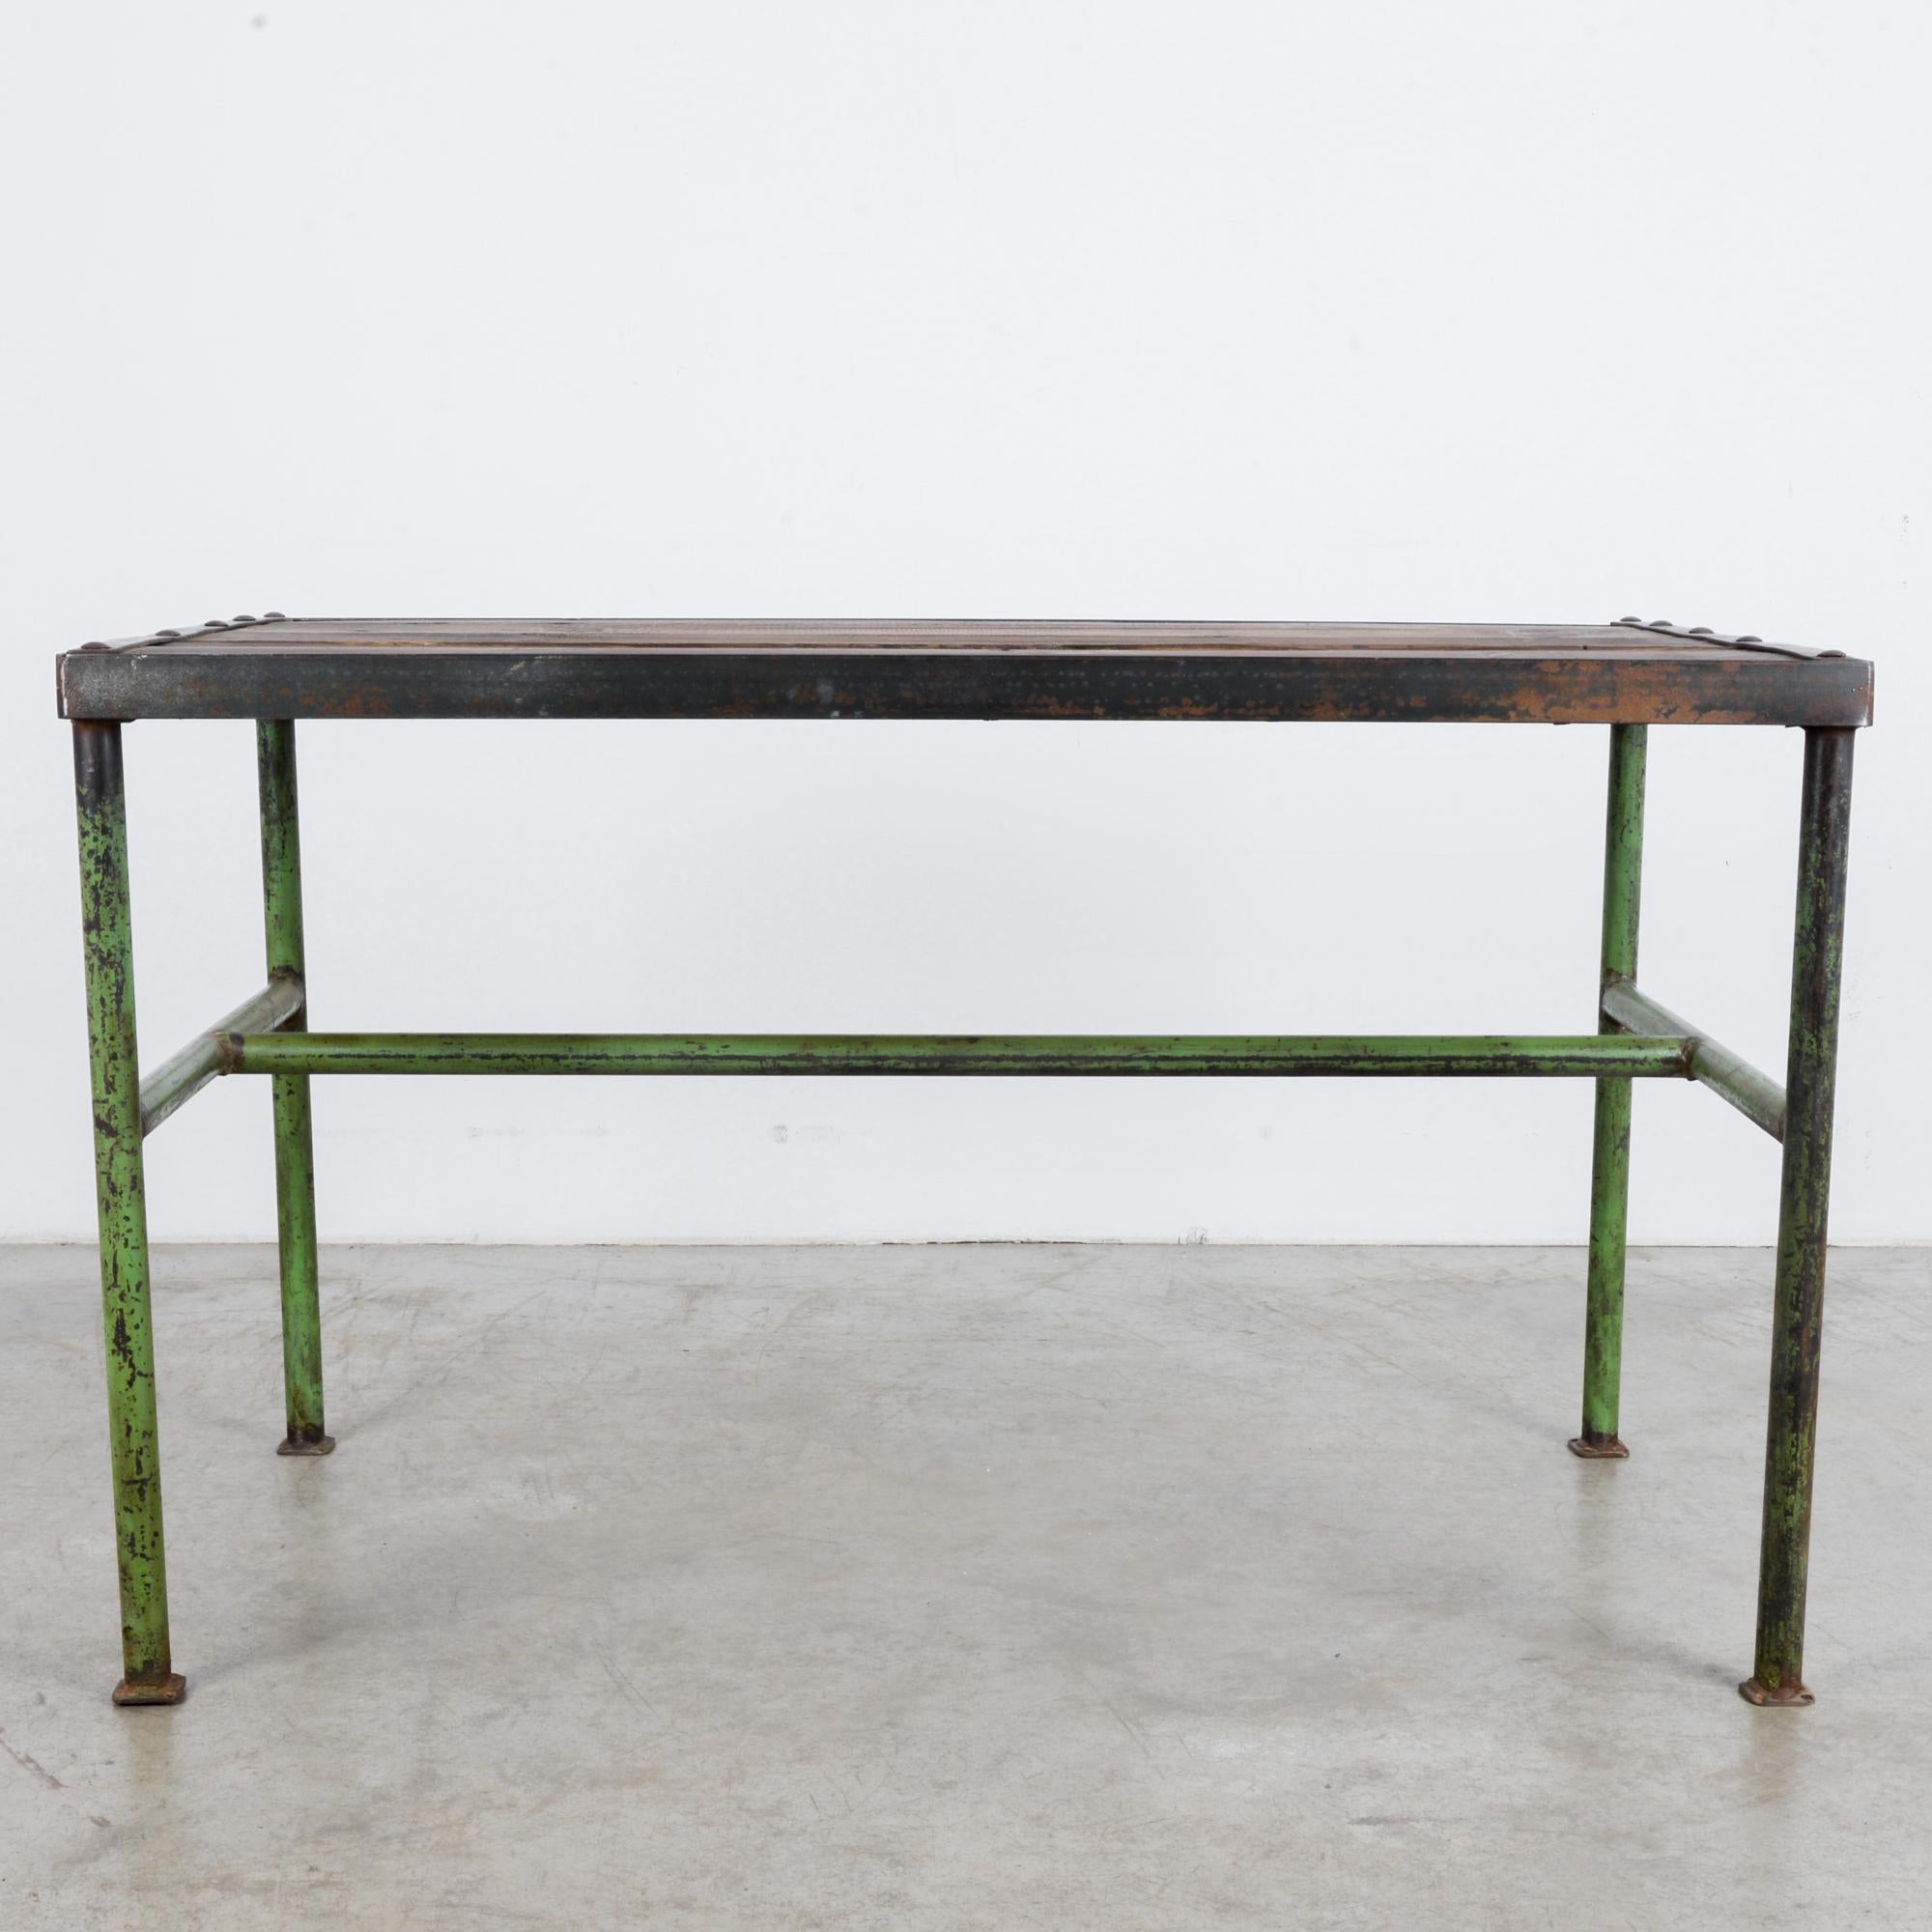 A Czech made metal work table with wooden top, produced, circa 1960. The dark tone of the wood works well with the iron casings holding the piece together. This versatile piece comes directly out of a midcentury workshop. It calls to mind creation,